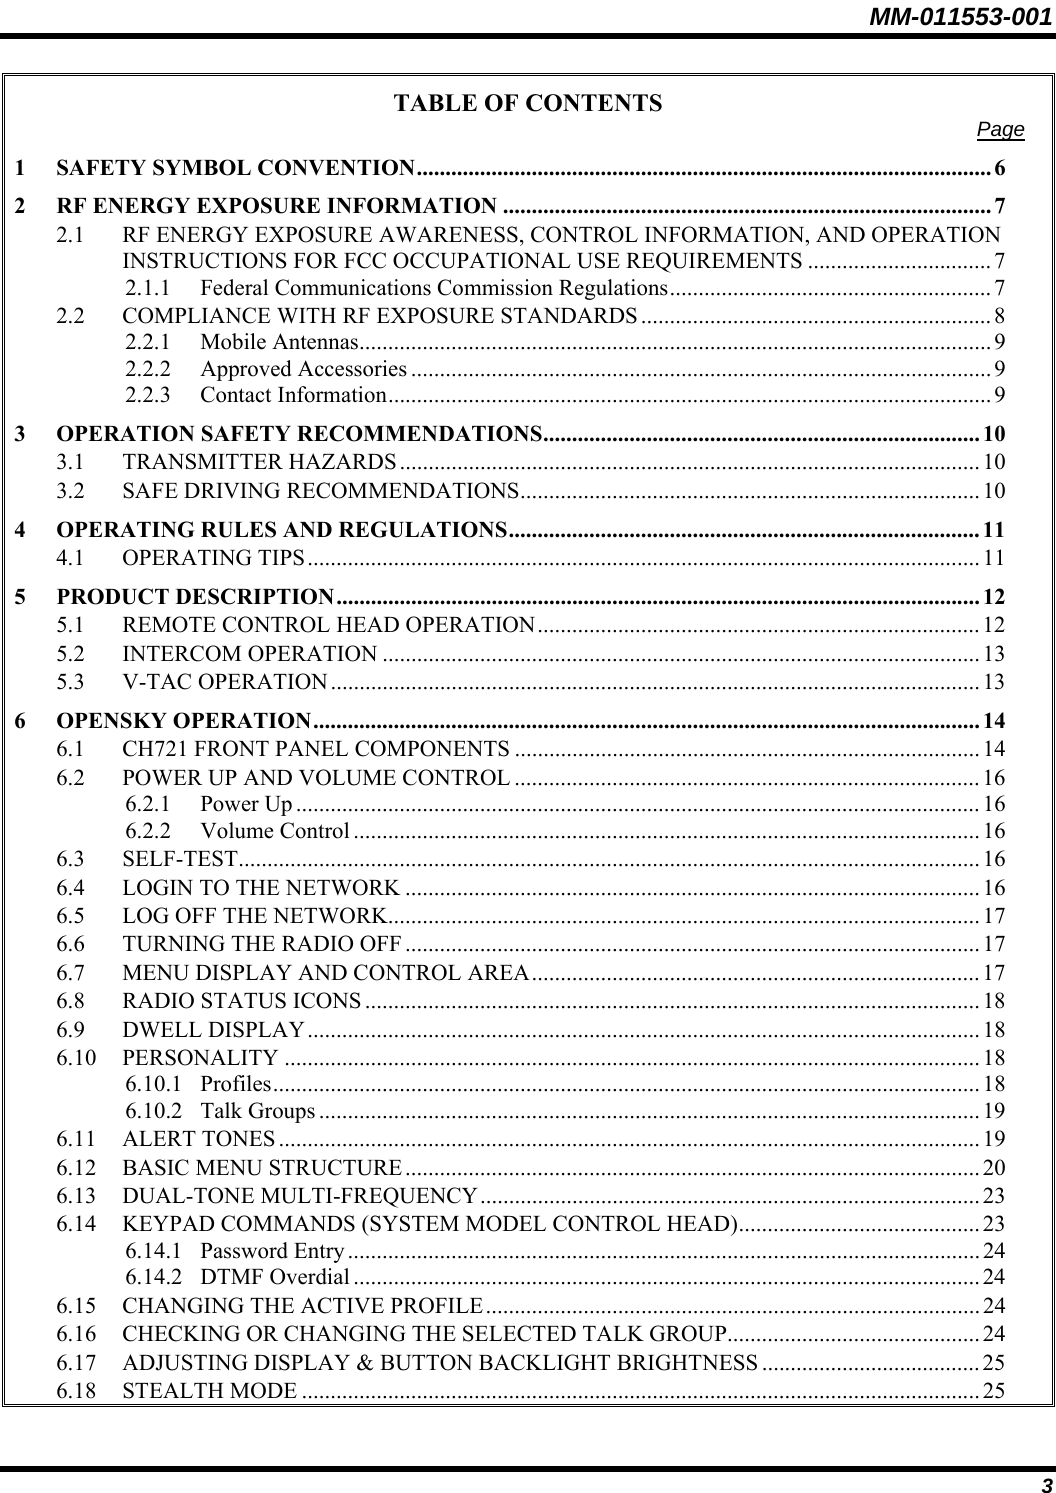 MM-011553-001 TABLE OF CONTENTS  Page 1 SAFETY SYMBOL CONVENTION.................................................................................................... 6 2 RF ENERGY EXPOSURE INFORMATION .....................................................................................7 2.1 RF ENERGY EXPOSURE AWARENESS, CONTROL INFORMATION, AND OPERATION INSTRUCTIONS FOR FCC OCCUPATIONAL USE REQUIREMENTS ................................ 7 2.1.1 Federal Communications Commission Regulations........................................................7 2.2 COMPLIANCE WITH RF EXPOSURE STANDARDS ............................................................. 8 2.2.1 Mobile Antennas.............................................................................................................. 9 2.2.2 Approved Accessories ..................................................................................................... 9 2.2.3 Contact Information......................................................................................................... 9 3 OPERATION SAFETY RECOMMENDATIONS............................................................................ 10 3.1 TRANSMITTER HAZARDS ..................................................................................................... 10 3.2 SAFE DRIVING RECOMMENDATIONS................................................................................ 10 4 OPERATING RULES AND REGULATIONS.................................................................................. 11 4.1 OPERATING TIPS..................................................................................................................... 11 5 PRODUCT DESCRIPTION................................................................................................................ 12 5.1 REMOTE CONTROL HEAD OPERATION............................................................................. 12 5.2 INTERCOM OPERATION ........................................................................................................ 13 5.3 V-TAC OPERATION.................................................................................................................13 6 OPENSKY OPERATION.................................................................................................................... 14 6.1 CH721 FRONT PANEL COMPONENTS .................................................................................14 6.2 POWER UP AND VOLUME CONTROL ................................................................................. 16 6.2.1 Power Up ....................................................................................................................... 16 6.2.2 Volume Control ............................................................................................................. 16 6.3 SELF-TEST................................................................................................................................. 16 6.4 LOGIN TO THE NETWORK .................................................................................................... 16 6.5 LOG OFF THE NETWORK....................................................................................................... 17 6.6 TURNING THE RADIO OFF ....................................................................................................17 6.7 MENU DISPLAY AND CONTROL AREA.............................................................................. 17 6.8 RADIO STATUS ICONS ........................................................................................................... 18 6.9 DWELL DISPLAY..................................................................................................................... 18 6.10 PERSONALITY ......................................................................................................................... 18 6.10.1 Profiles........................................................................................................................... 18 6.10.2 Talk Groups ................................................................................................................... 19 6.11 ALERT TONES .......................................................................................................................... 19 6.12 BASIC MENU STRUCTURE....................................................................................................20 6.13 DUAL-TONE MULTI-FREQUENCY....................................................................................... 23 6.14 KEYPAD COMMANDS (SYSTEM MODEL CONTROL HEAD).......................................... 23 6.14.1 Password Entry..............................................................................................................24 6.14.2 DTMF Overdial ............................................................................................................. 24 6.15 CHANGING THE ACTIVE PROFILE...................................................................................... 24 6.16 CHECKING OR CHANGING THE SELECTED TALK GROUP............................................ 24 6.17 ADJUSTING DISPLAY &amp; BUTTON BACKLIGHT BRIGHTNESS ...................................... 25 6.18 STEALTH MODE ...................................................................................................................... 25 3 